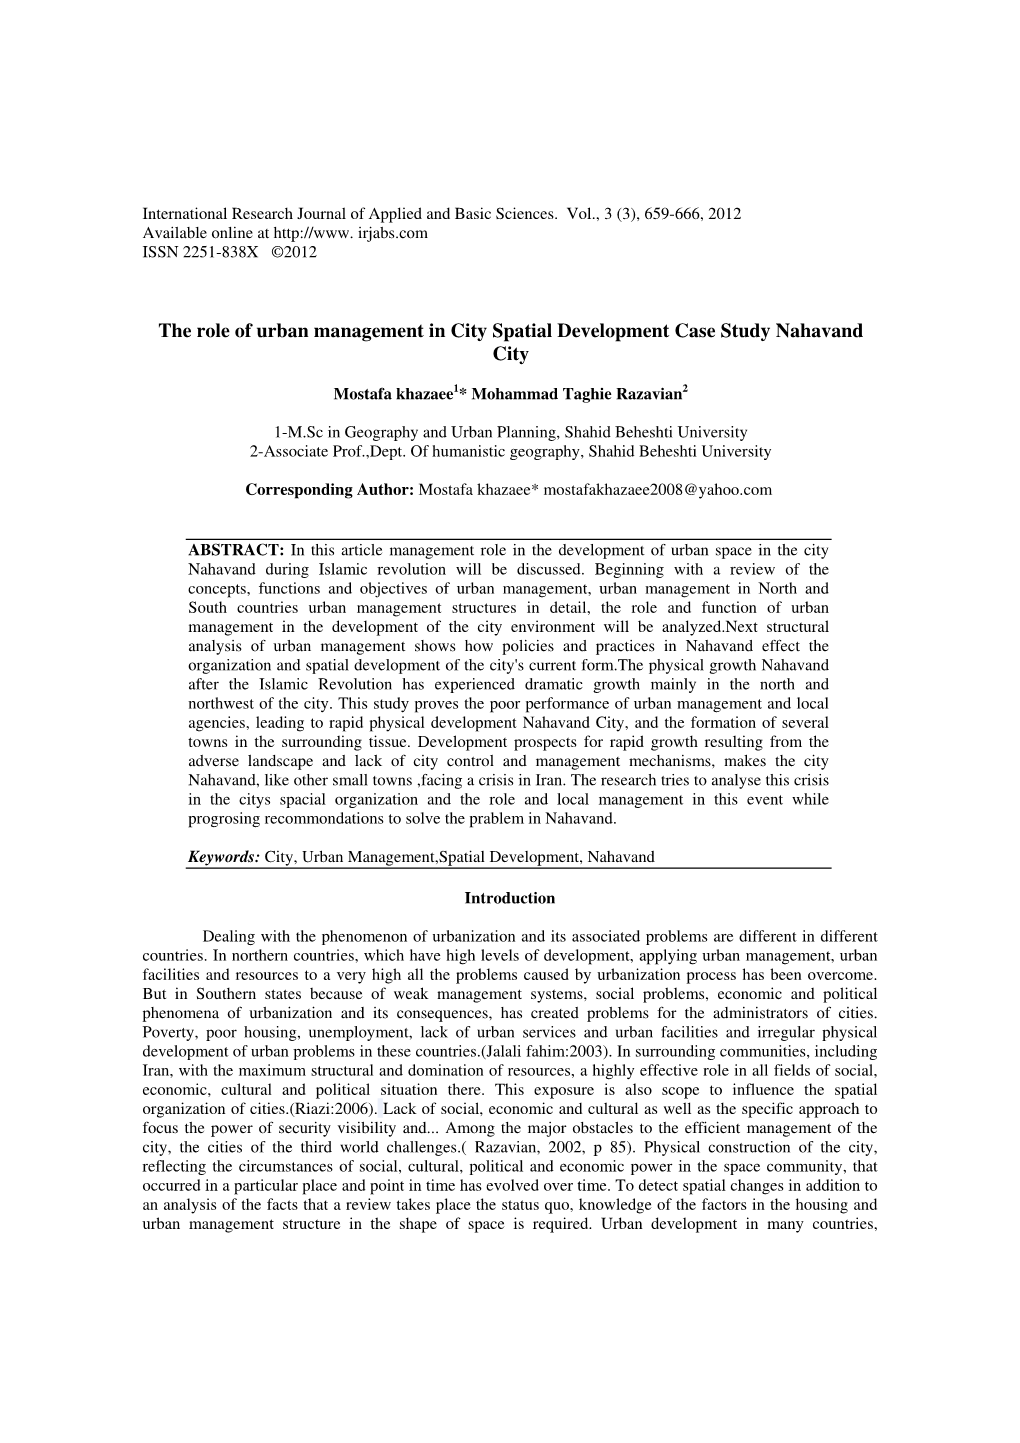 The Role of Urban Management in City Spatial Development Case Study Nahavand City